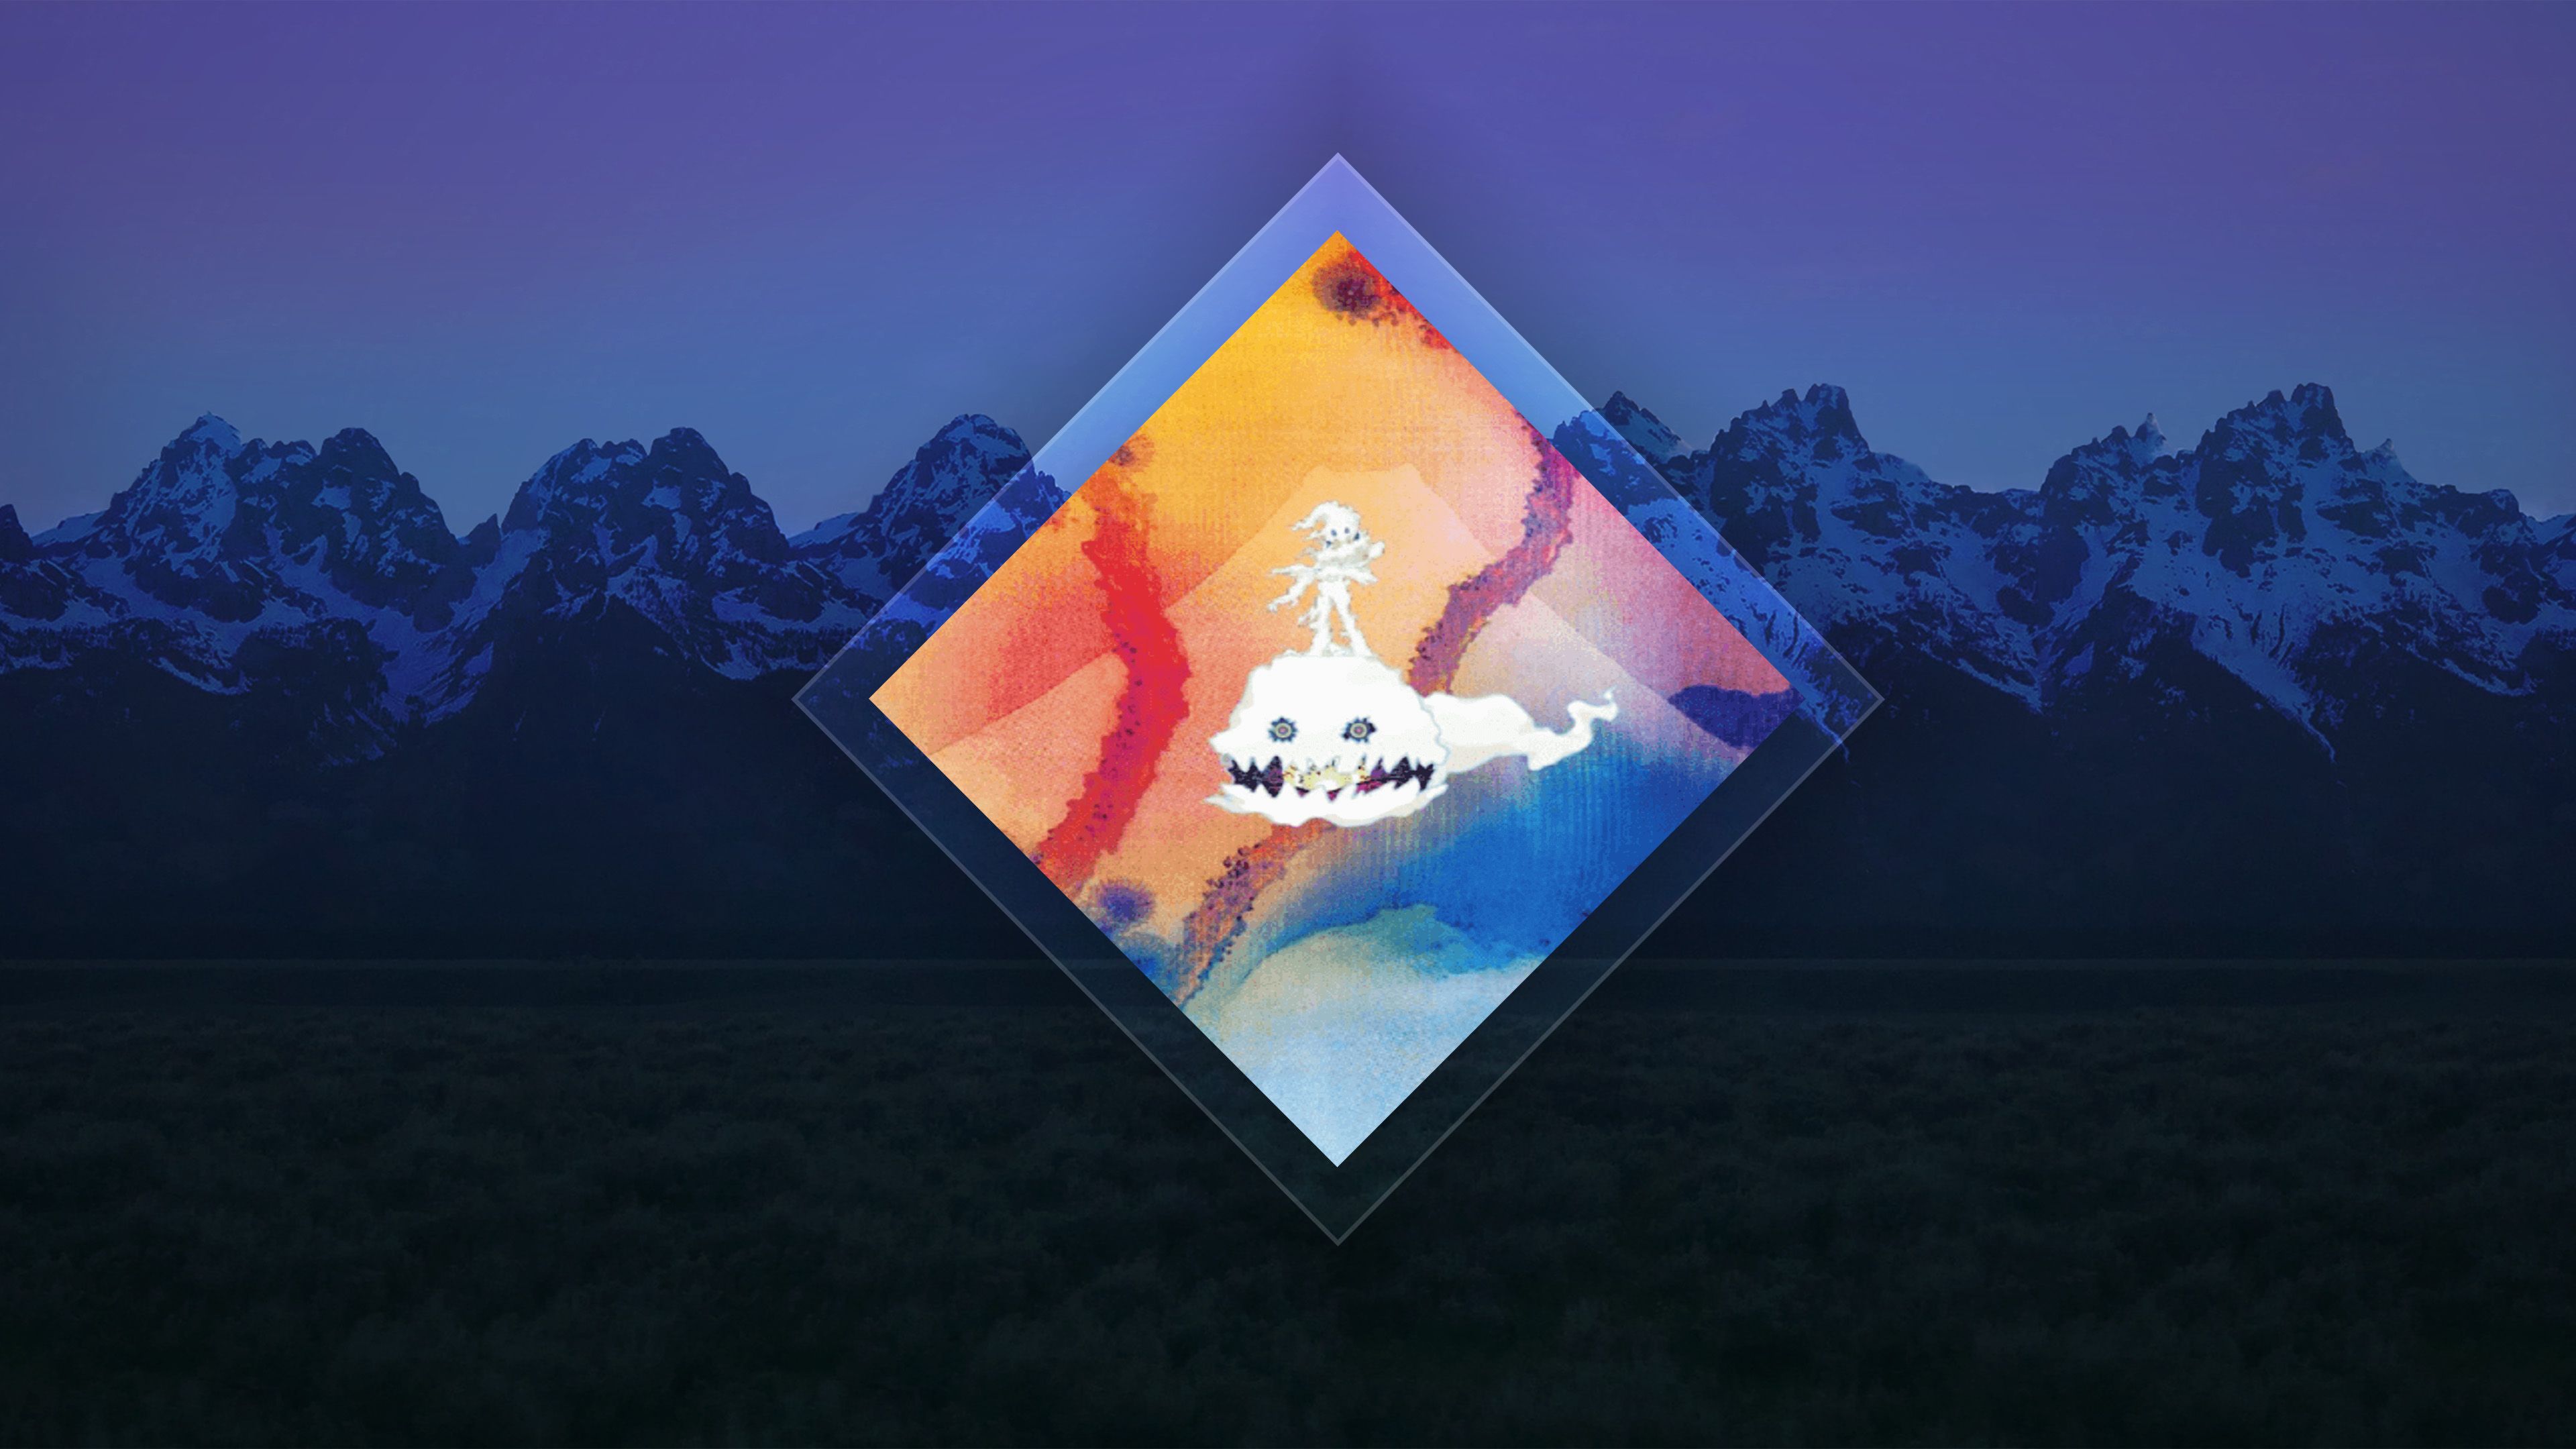 Kanye West Kids See Ghost Album Cover Art Wallpaper HD 1920 x Ye Wyoming Album Art Wallpaper. Ghost album, Album cover art, Kanye west kids